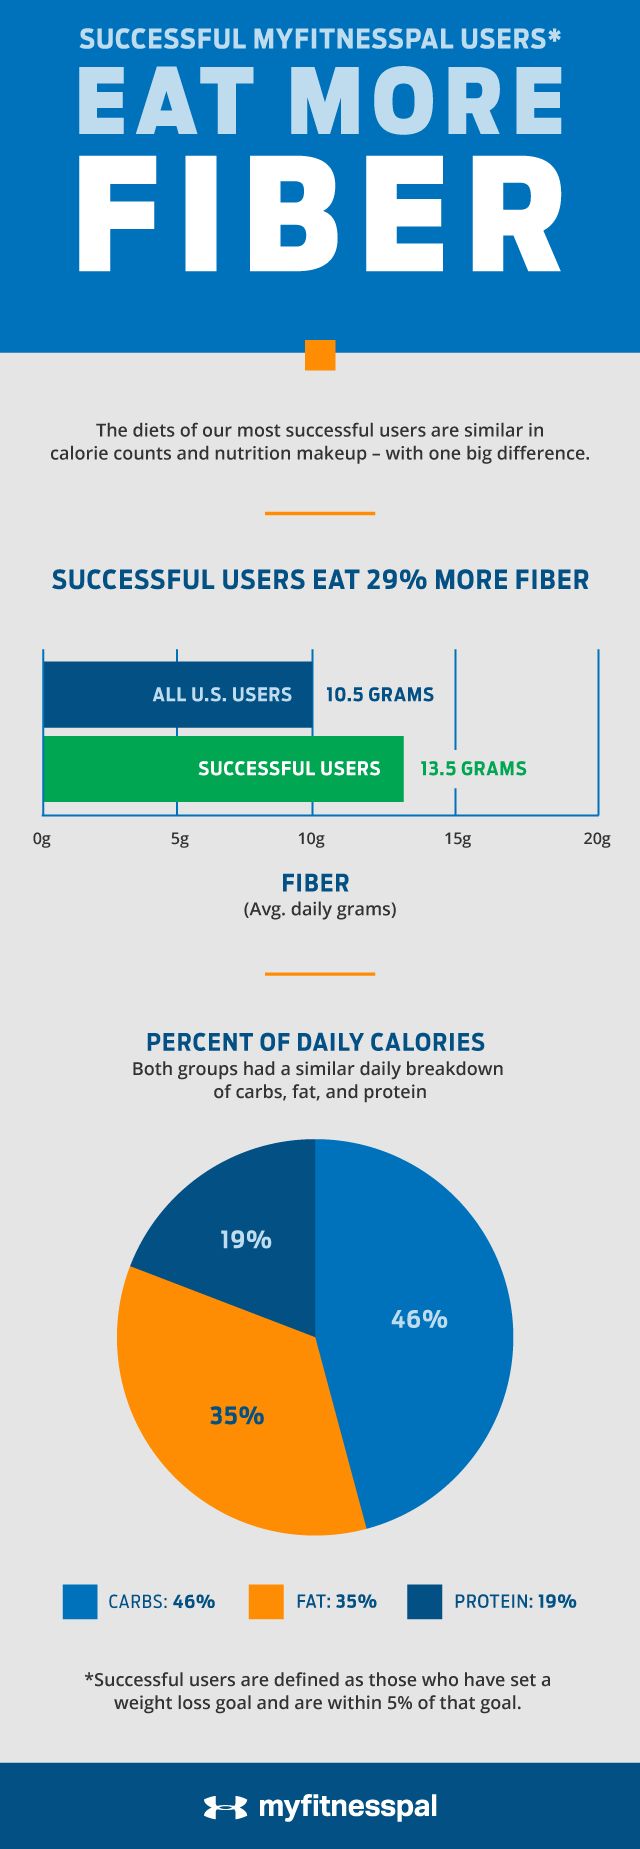 Findings from the Under Armour and MyFitnessPal analysis showed that users who hit their goal weights ate more fiber. 